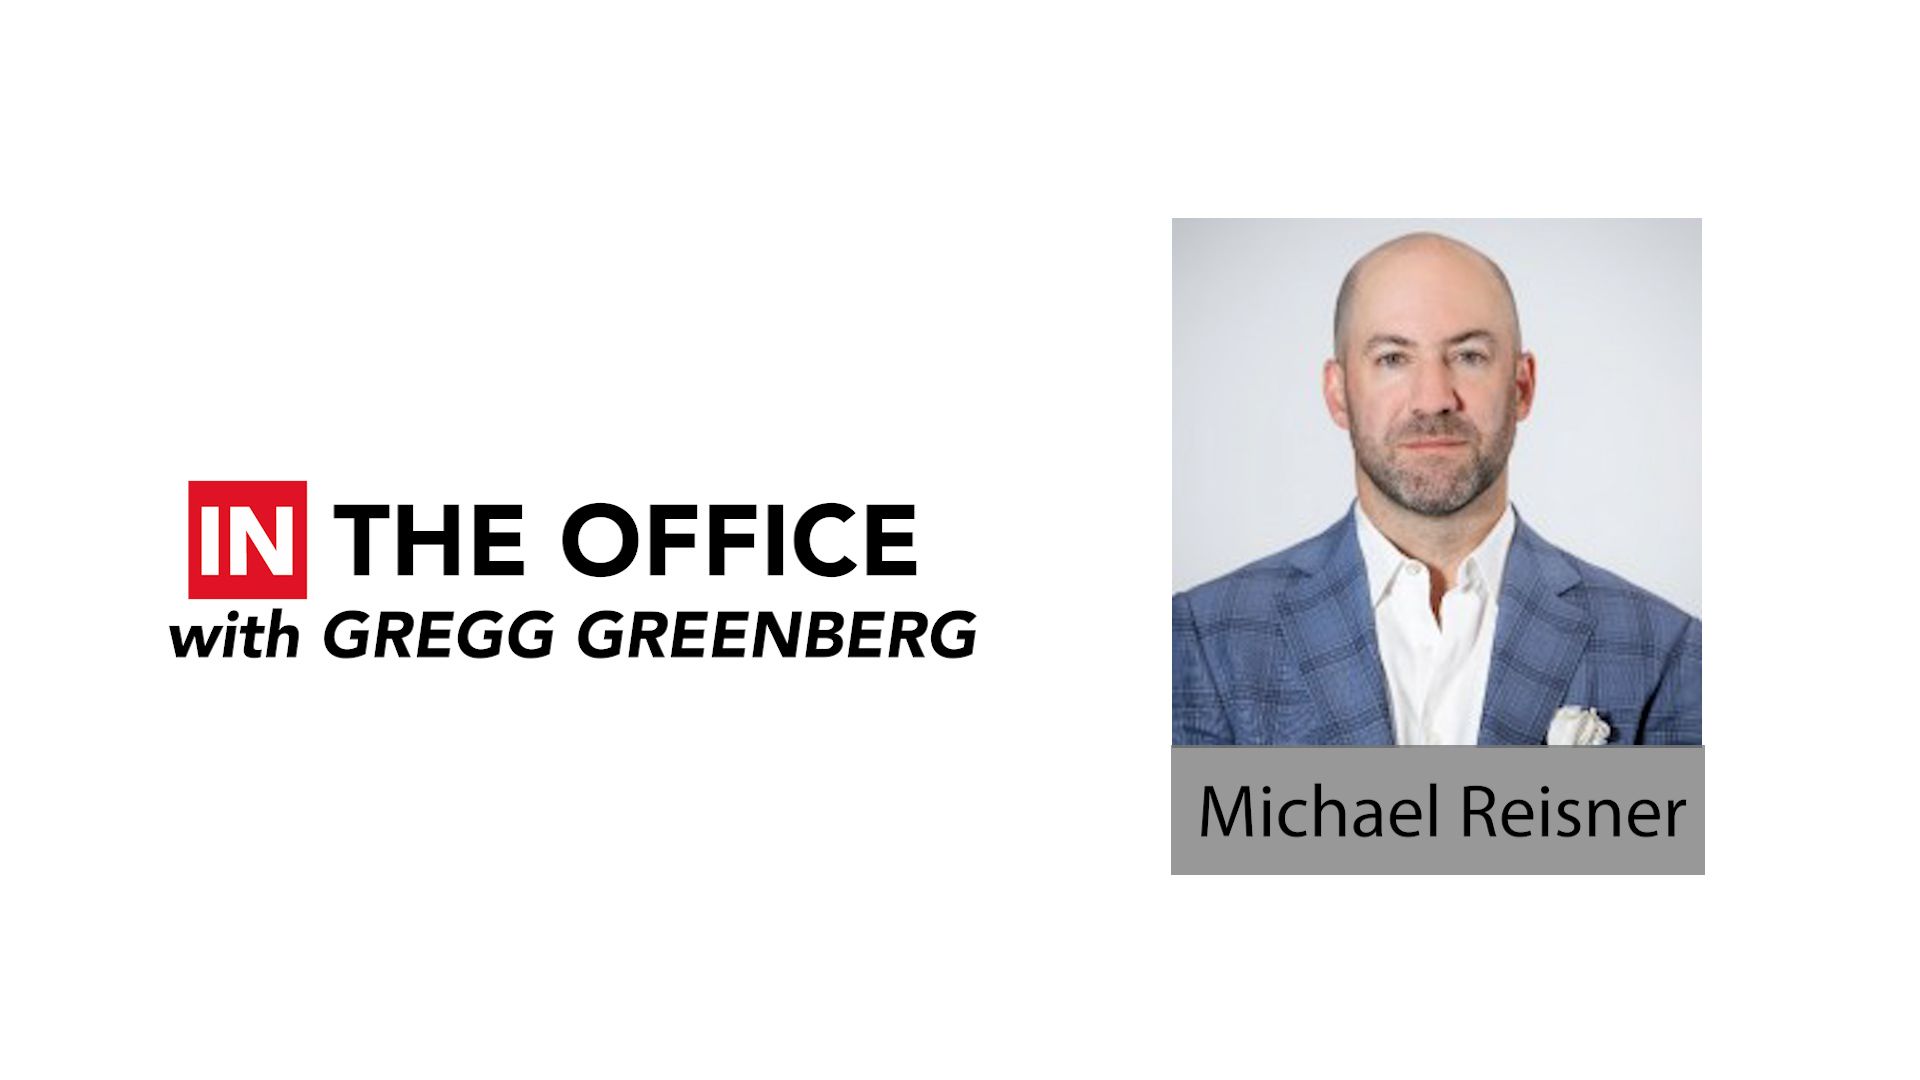 ‘IN the Office’ with alternatives and BDC specialist Michael Reisner